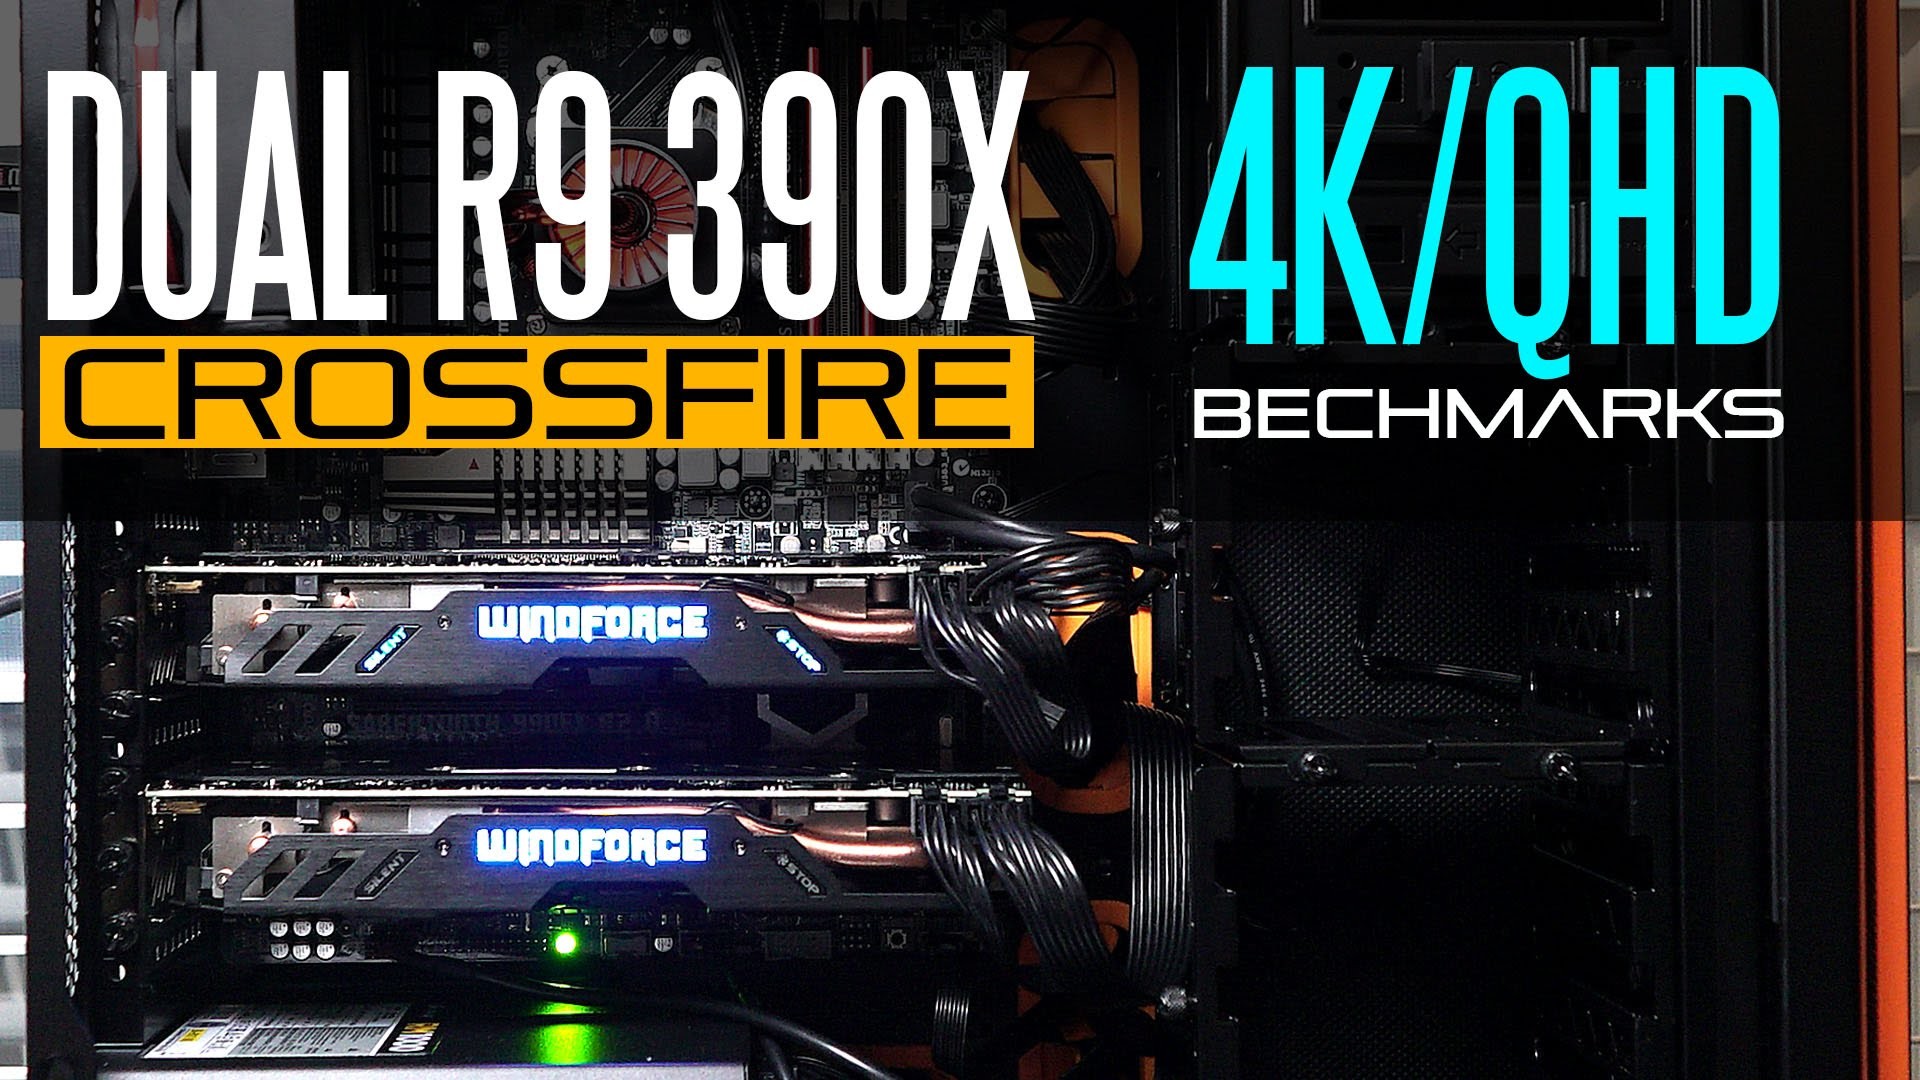 Overclocked Dual R9 390X /AMD FX 9590 Gaming Rig – 4k / Ultra Wide QHD  Benchmarks – YouTube